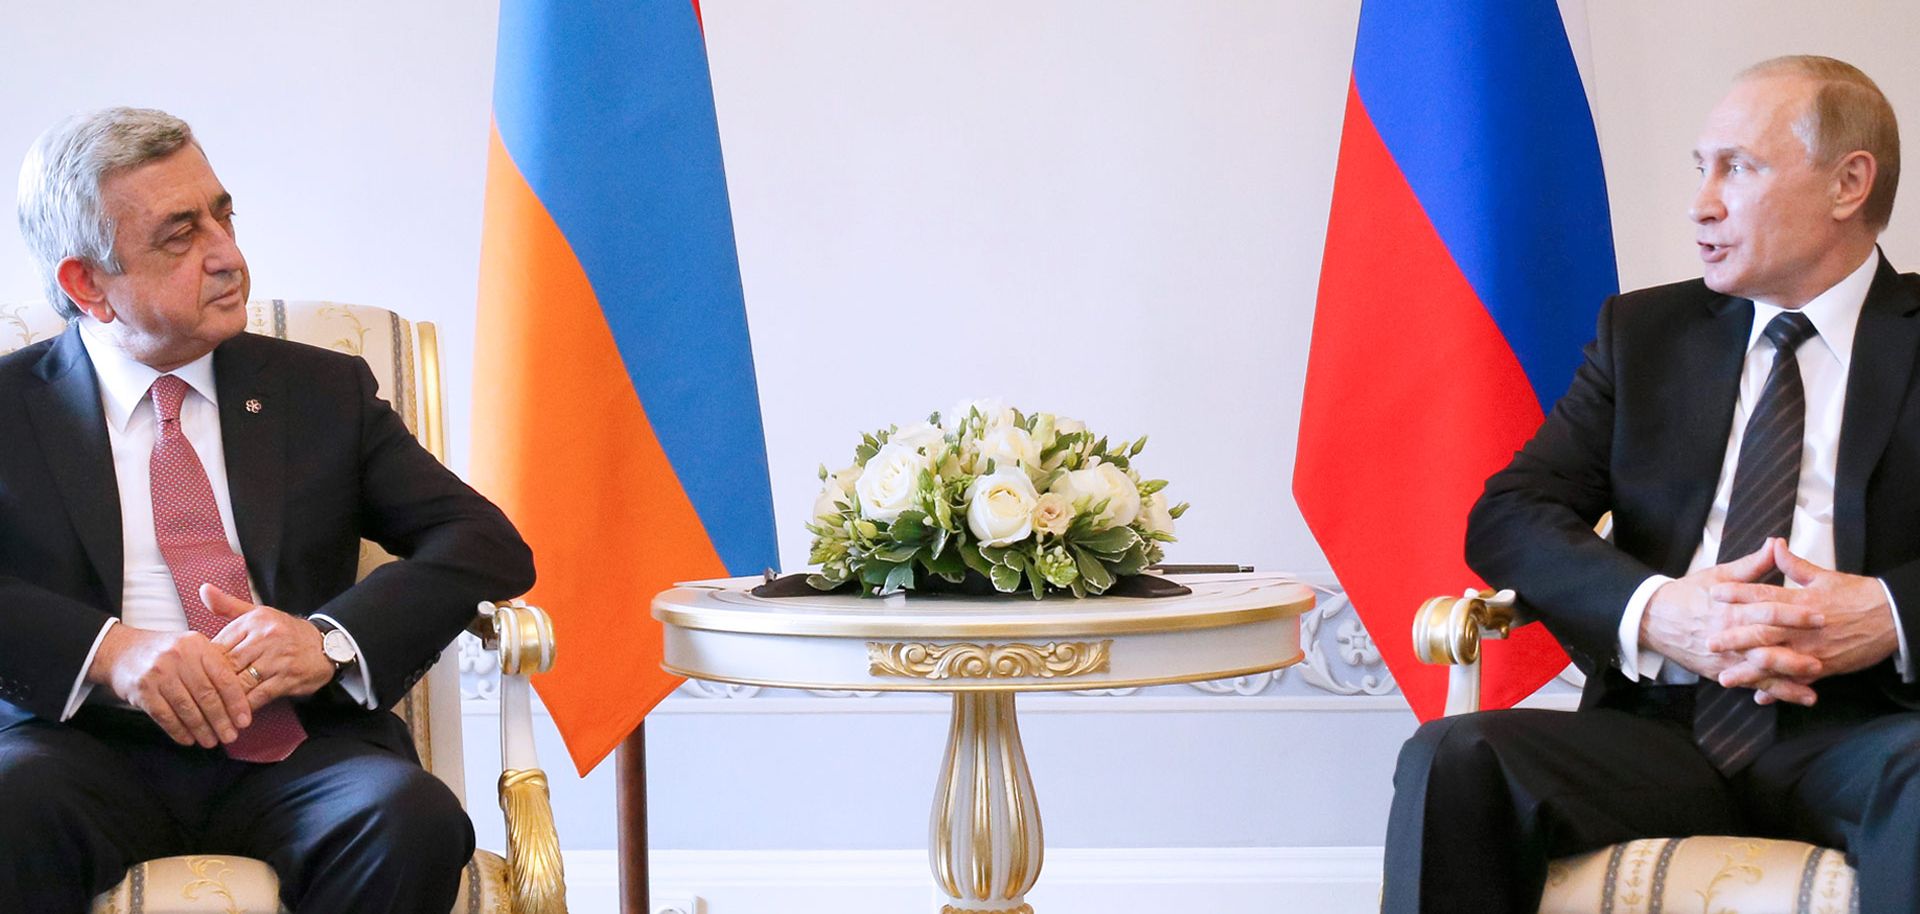 Russian President Vladimir Putin (R) mediated the latest round of talks between Armenian leader Serzh Sarkisian (L) and Azerbaijani President Ilham Aliyev on June 20 in St. Petersburg. The three met to discuss an end to the Nagorno-Karabakh conflict.